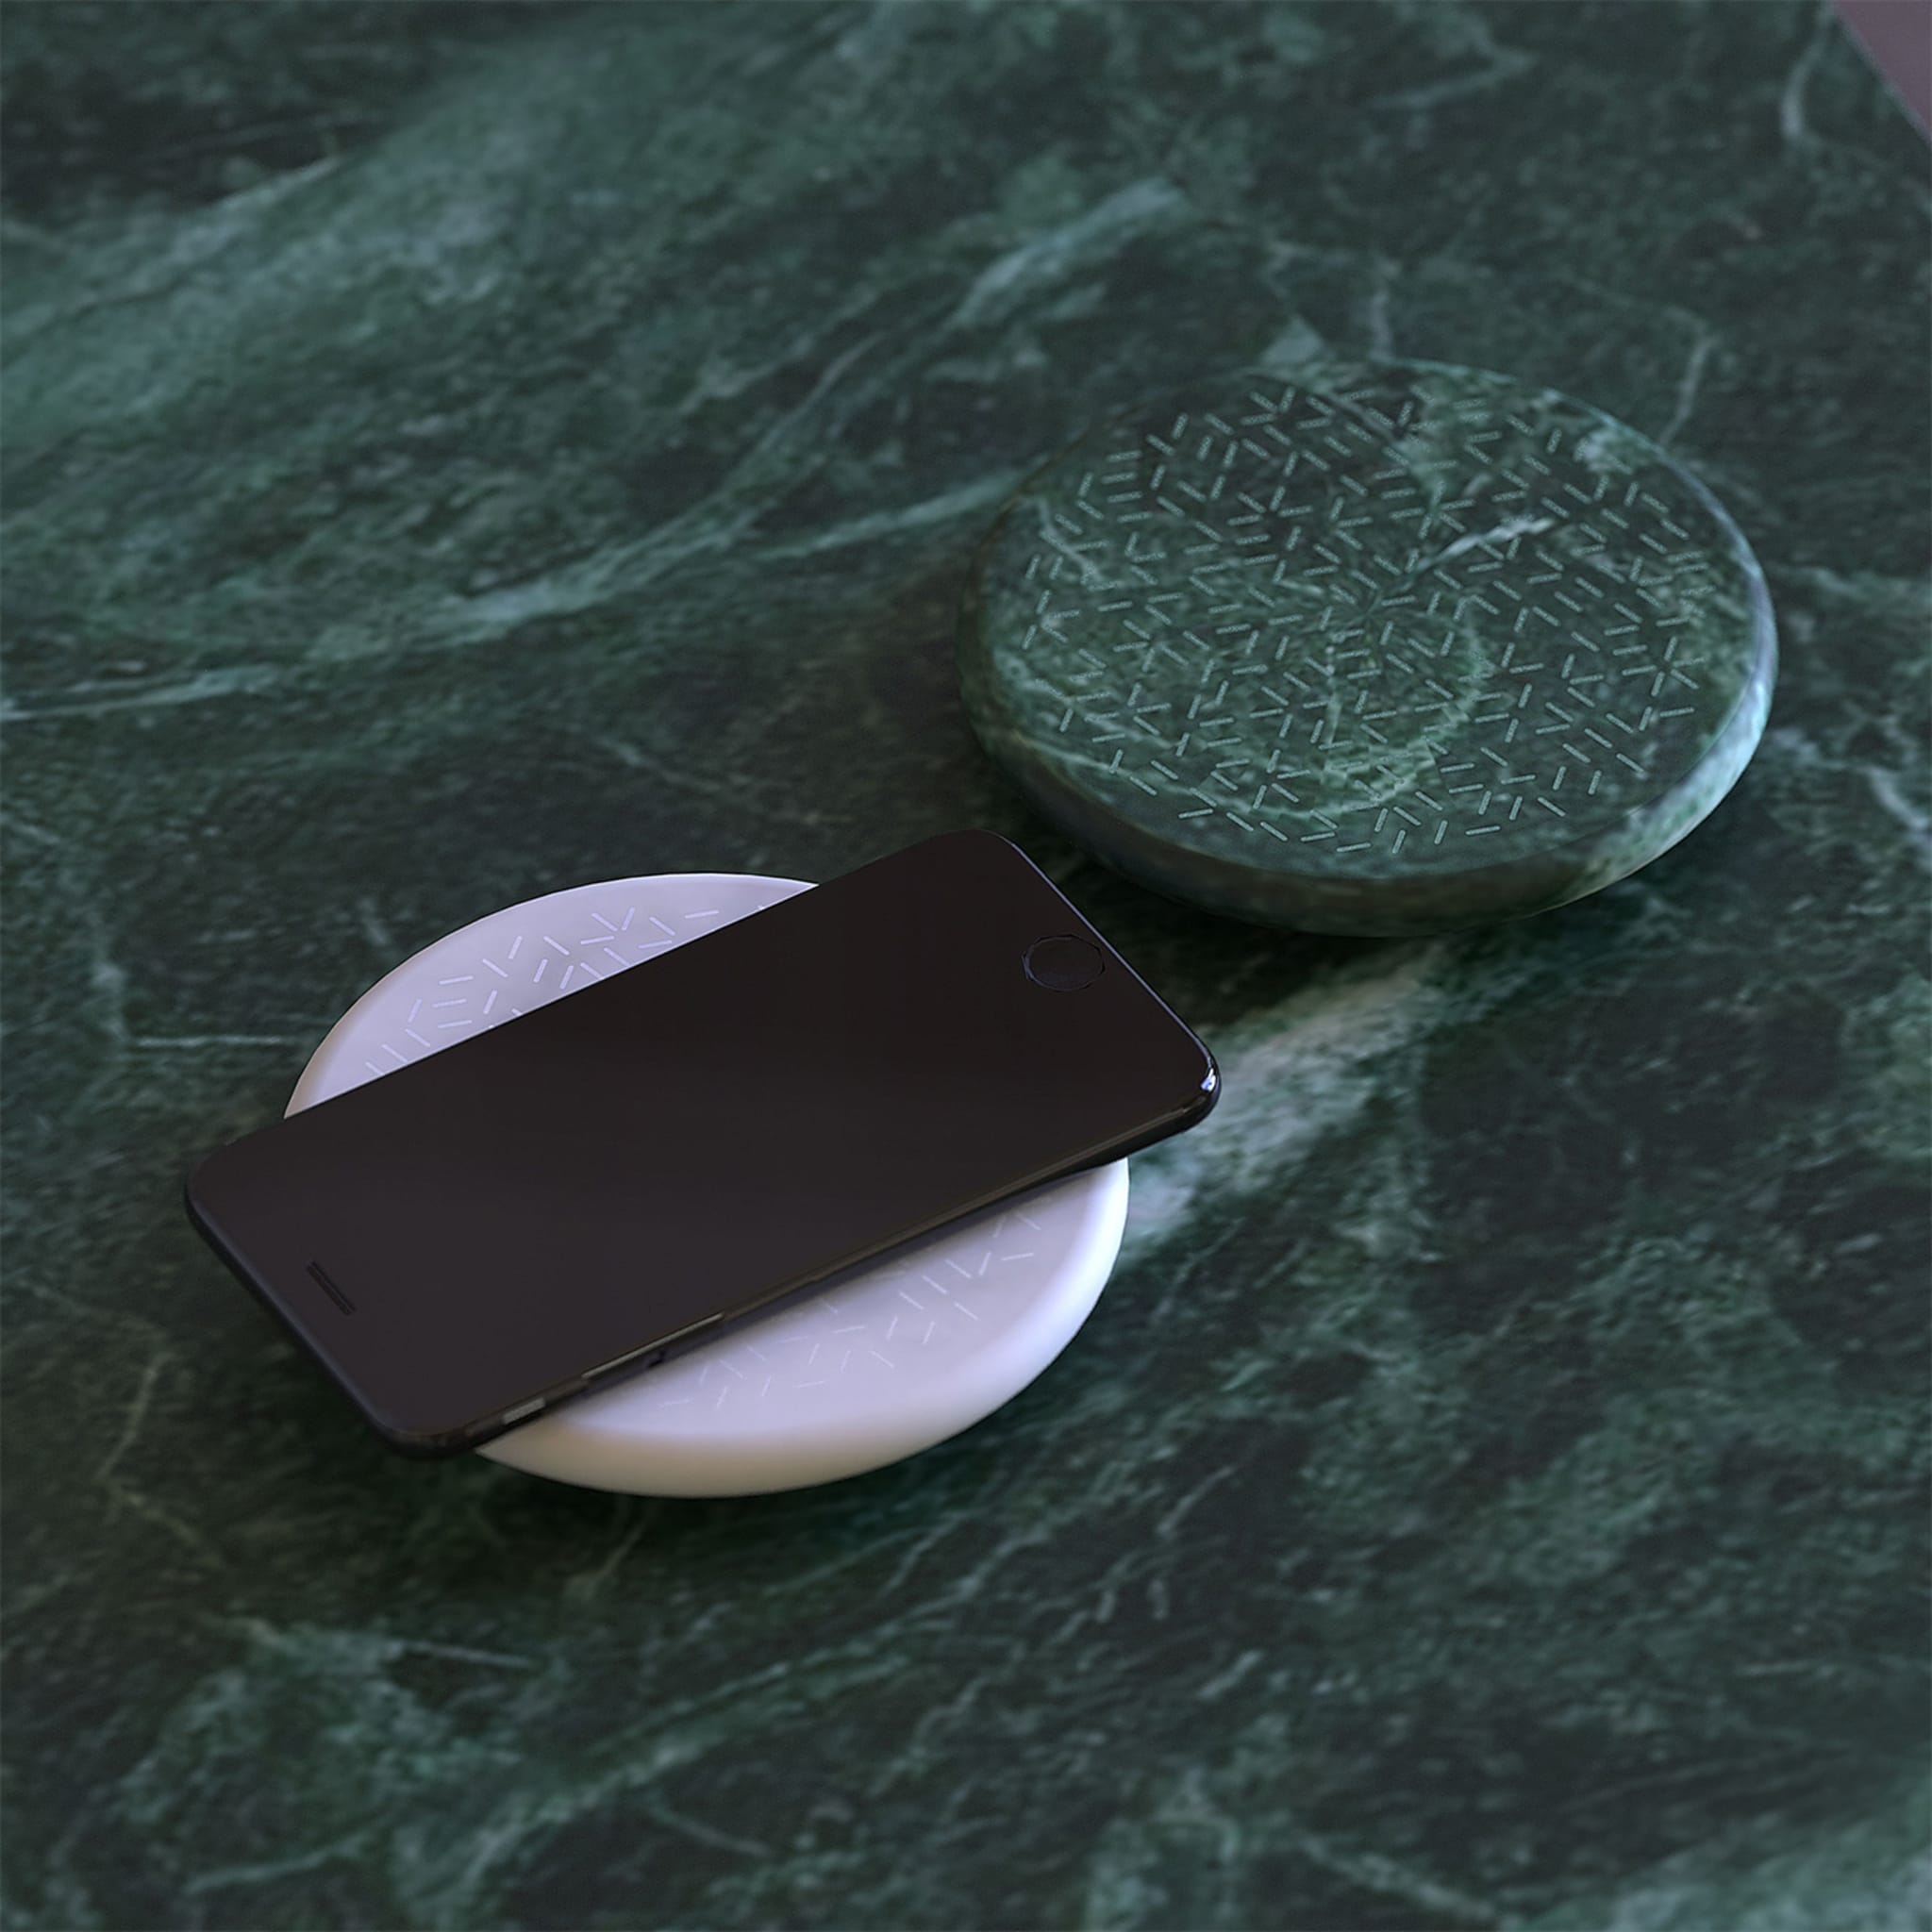 Selce Wireless Phone Charger by Efrem Bonacina and Andrea Teoldi - Alternative view 2